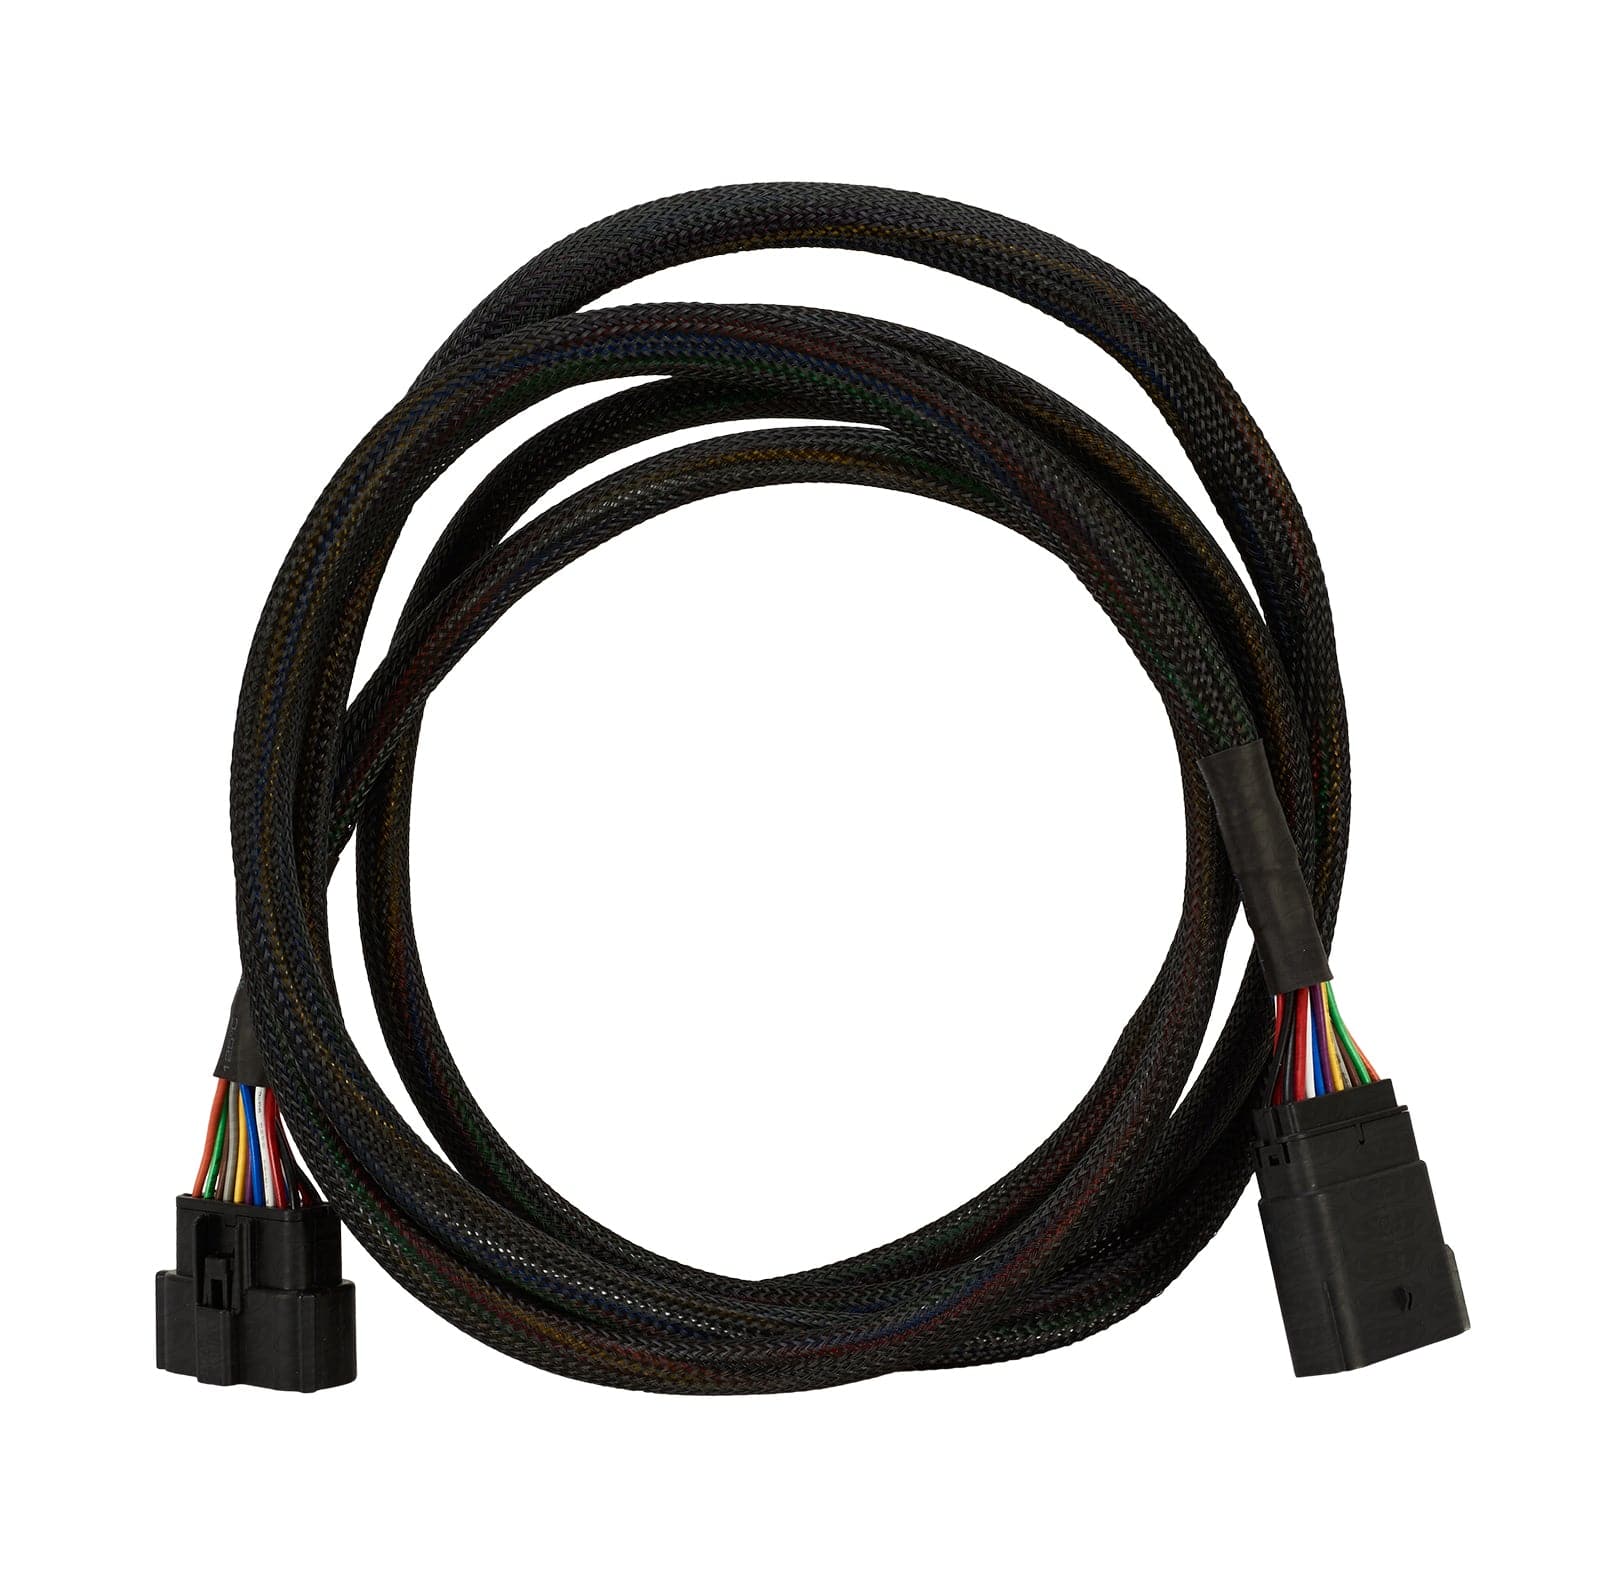 SBT's Mainteneance Extension Cable fits Sea-Doo Spark